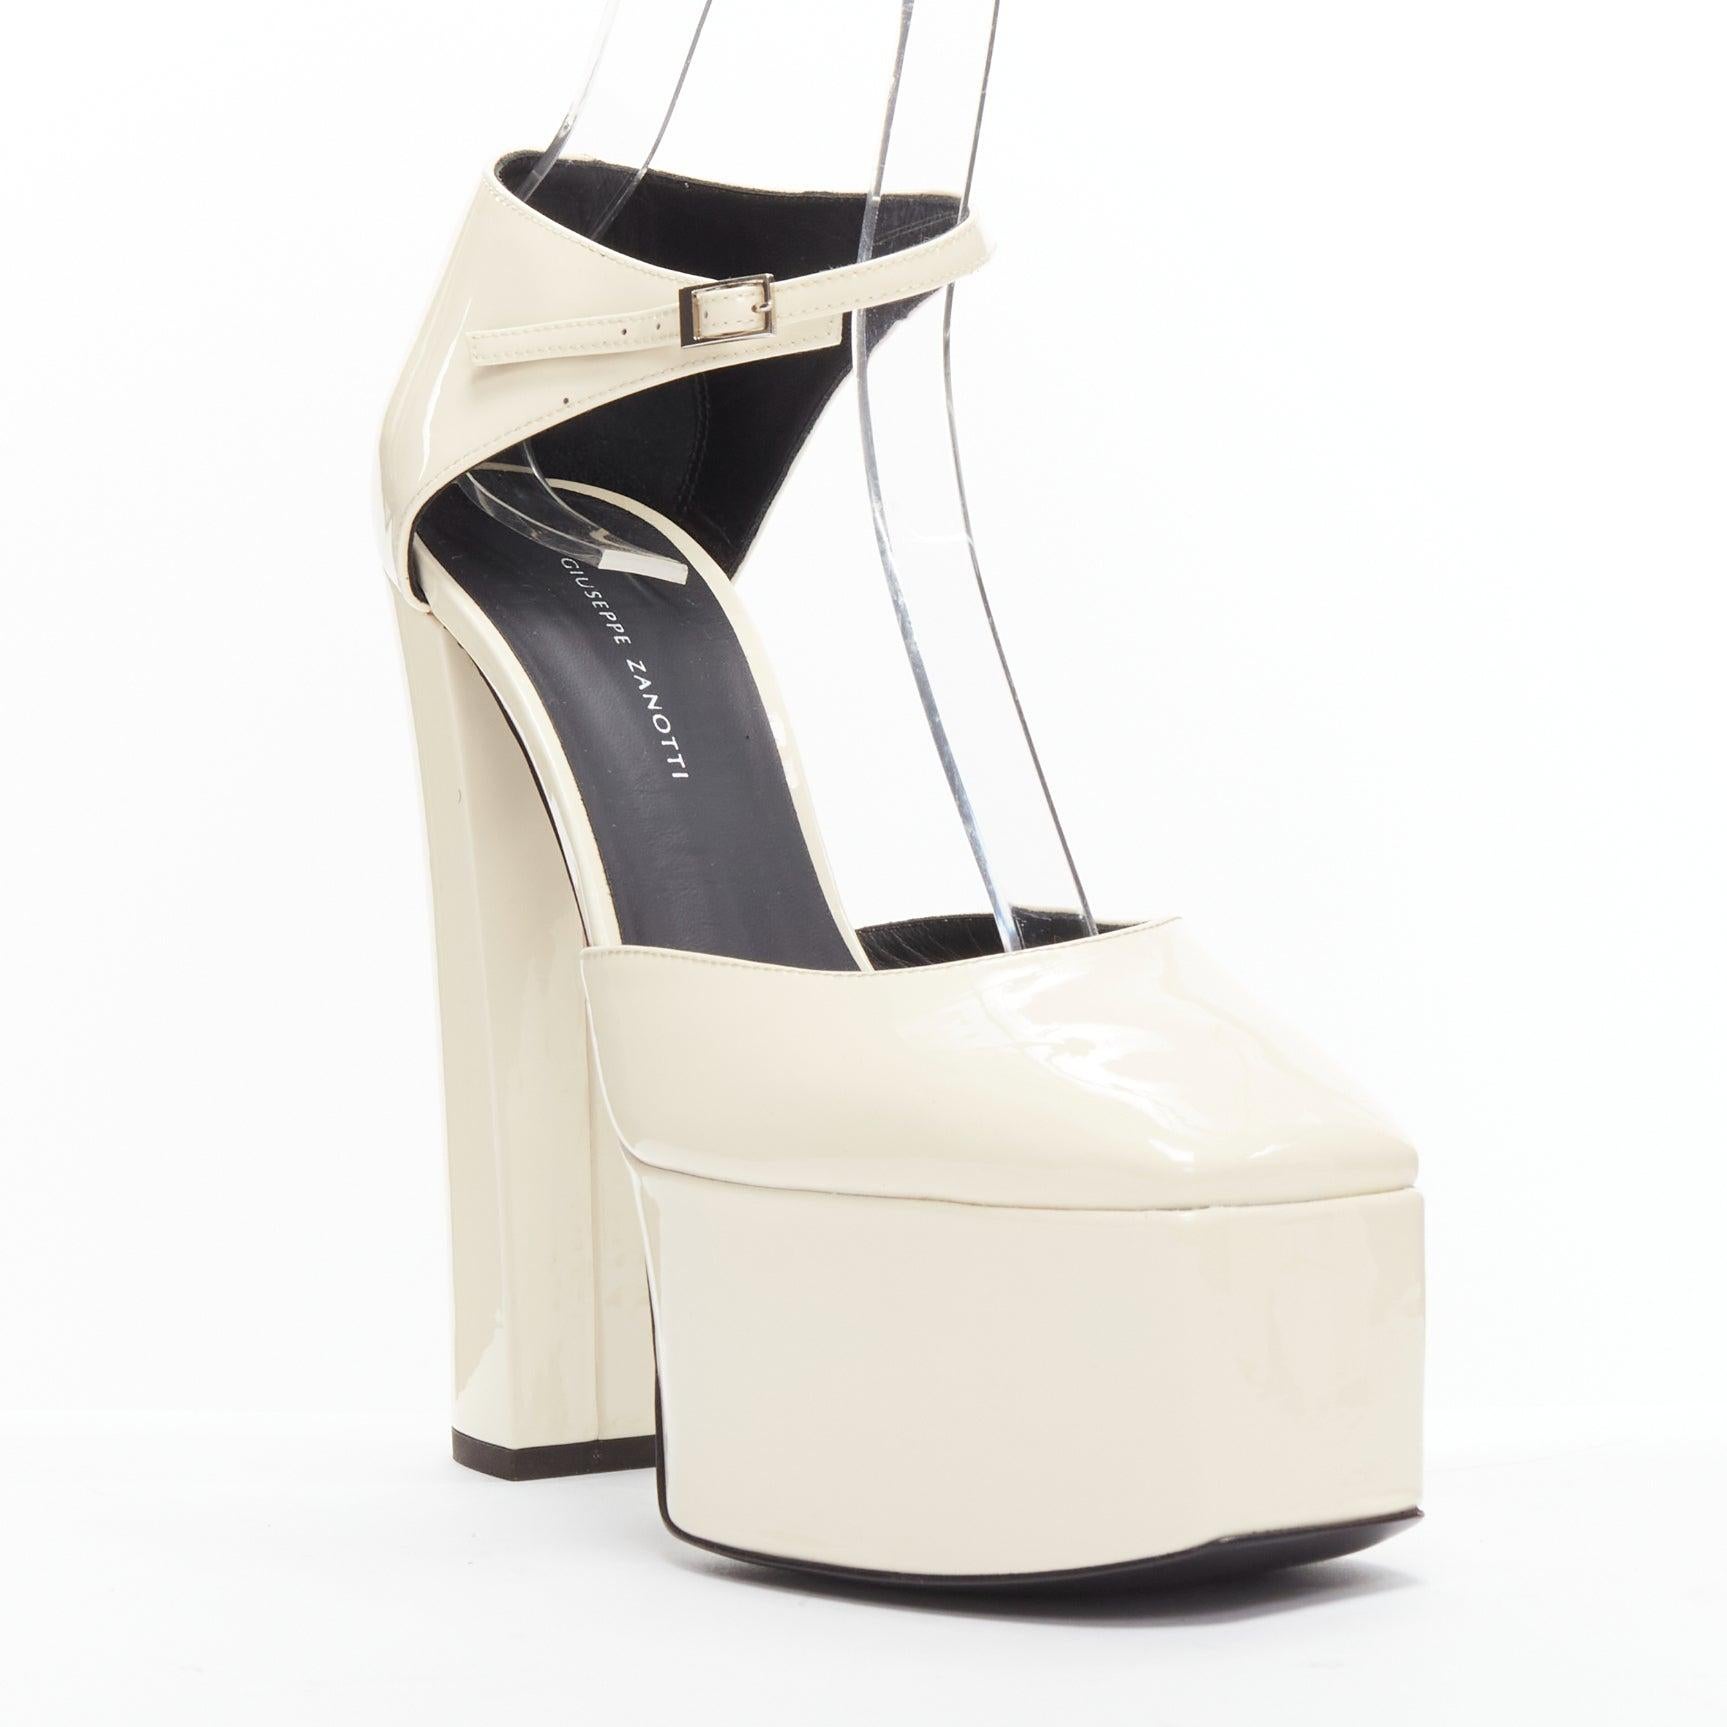 GIUSEPPE ZANOTTI Bebe cream patent leather platform heels EU39
Reference: BSHW/A00145
Brand: Giuseppe Zanotti
Model: Bebe
Material: Leather
Color: Cream
Pattern: Solid
Closure: Buckle
Lining: Black Leather
Extra Details: Chunky heels.
Made in: